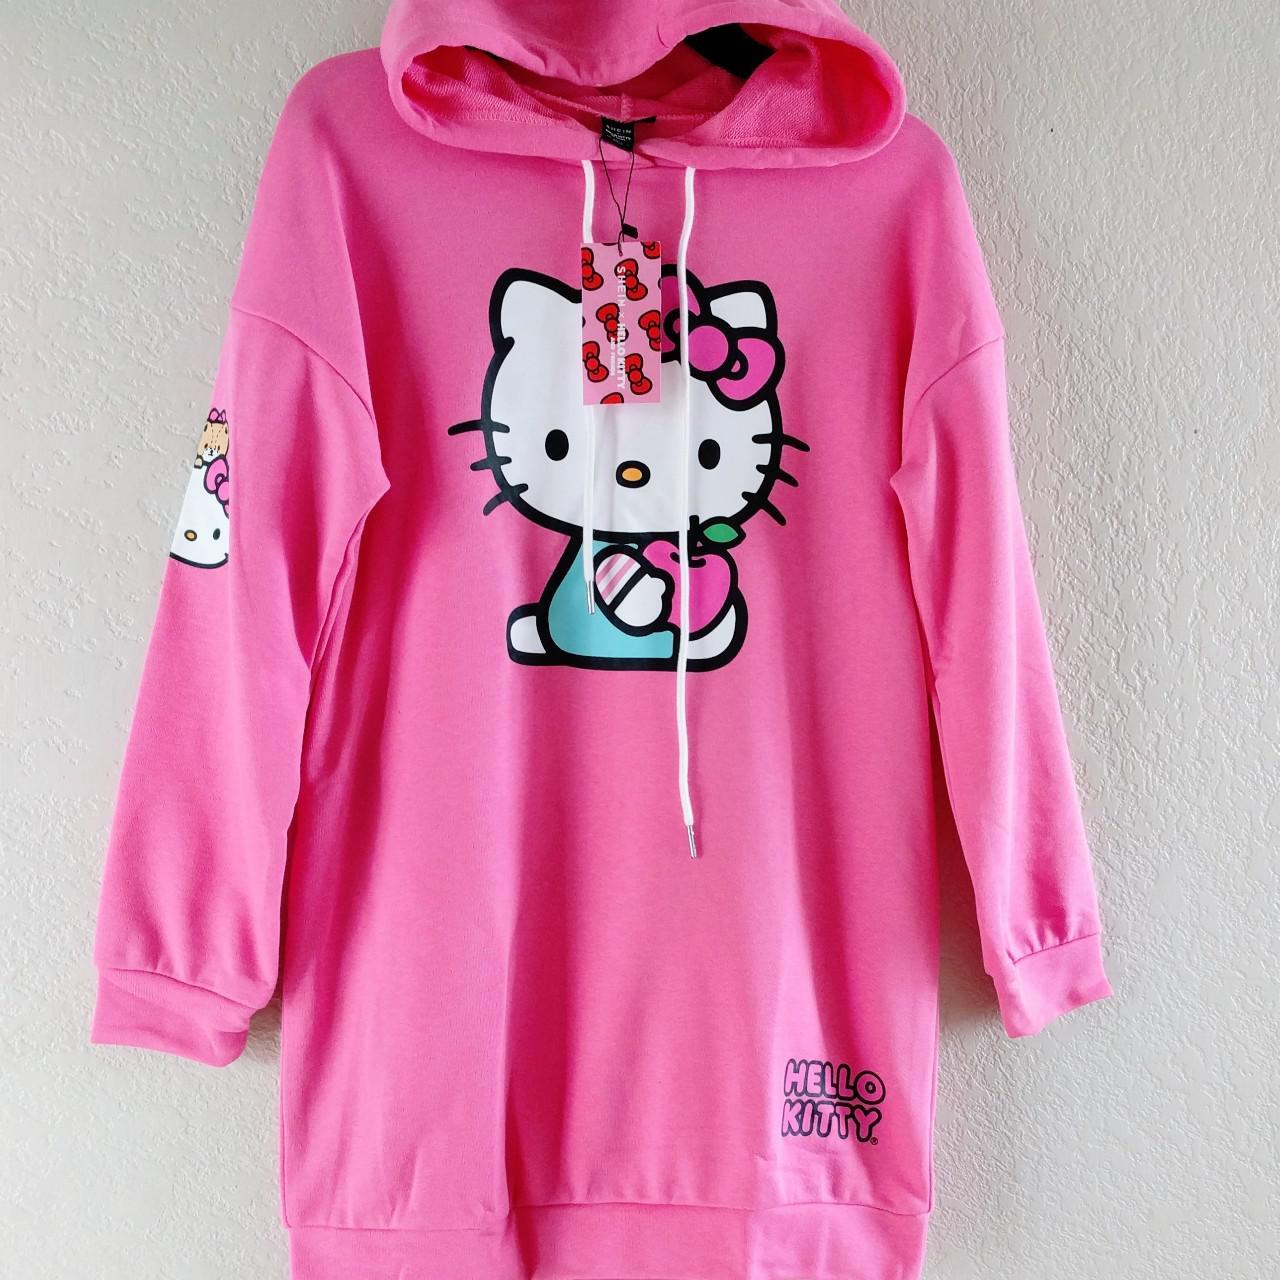 Hello Kitty Haul From SHEIN :D